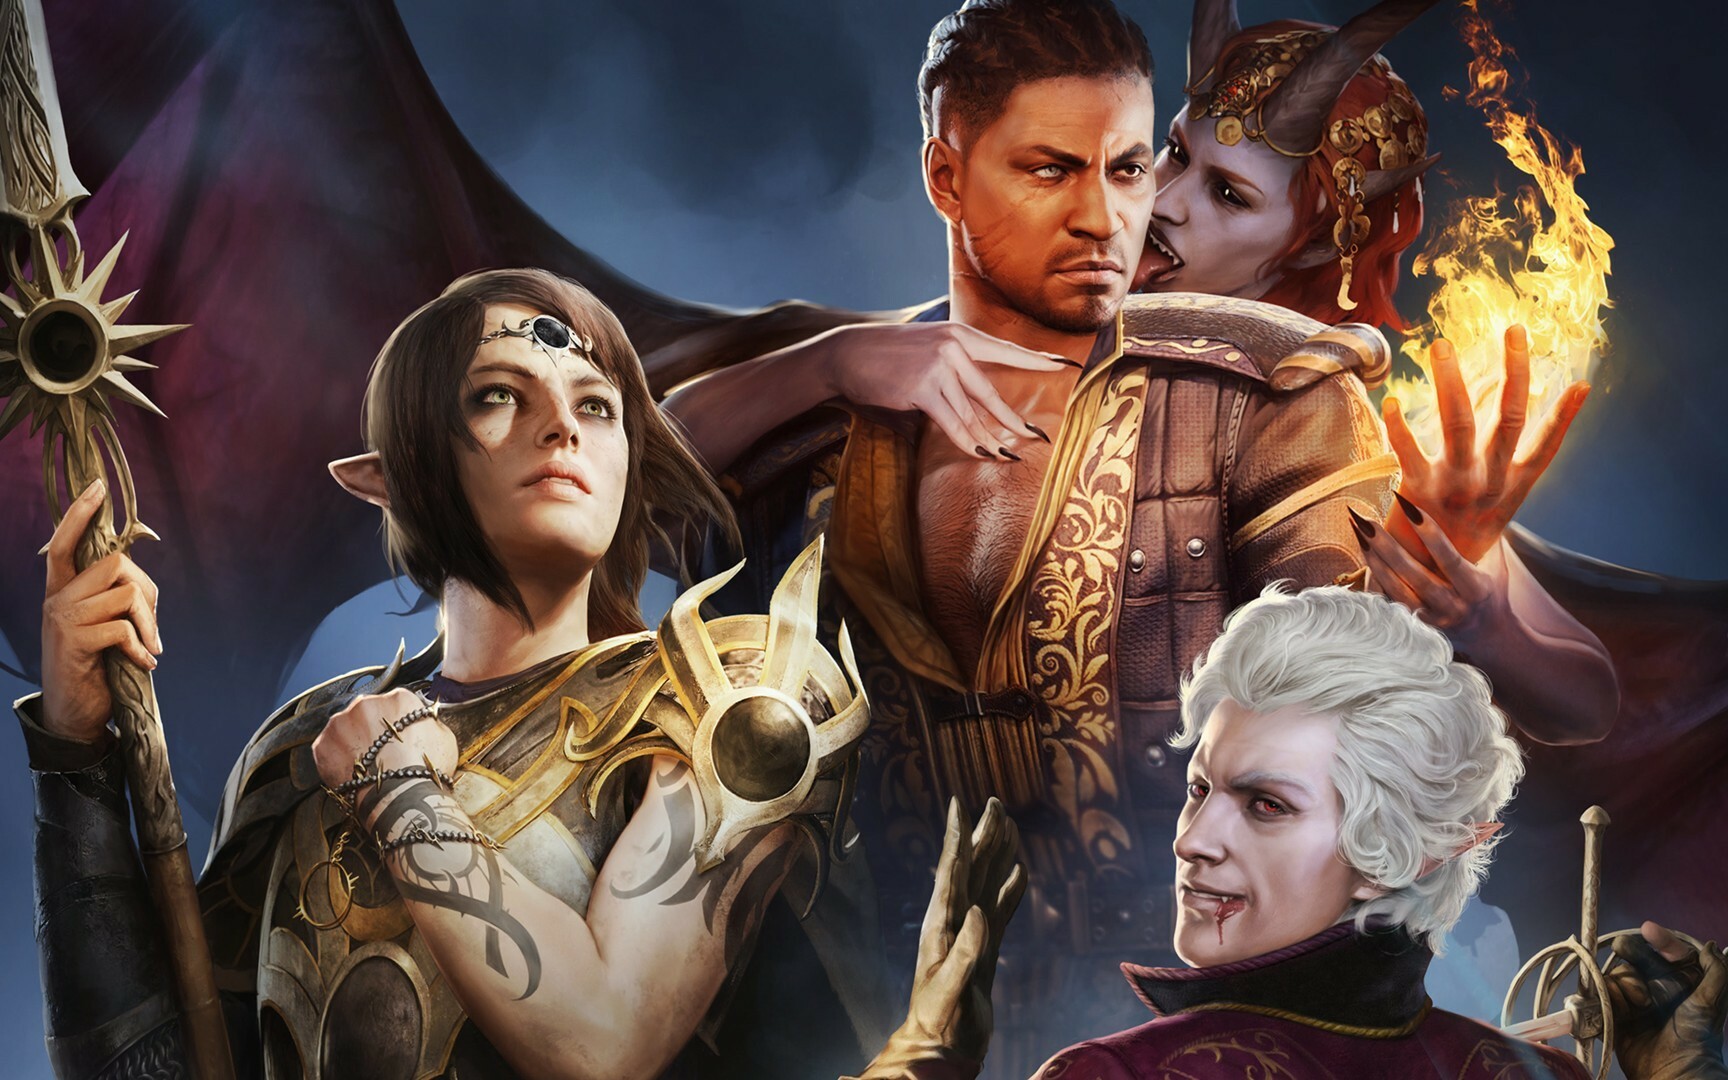 Baldur’s Gate 3 on XSX|S on December 6?  Reports indicate that it will be launched at the beginning of next month